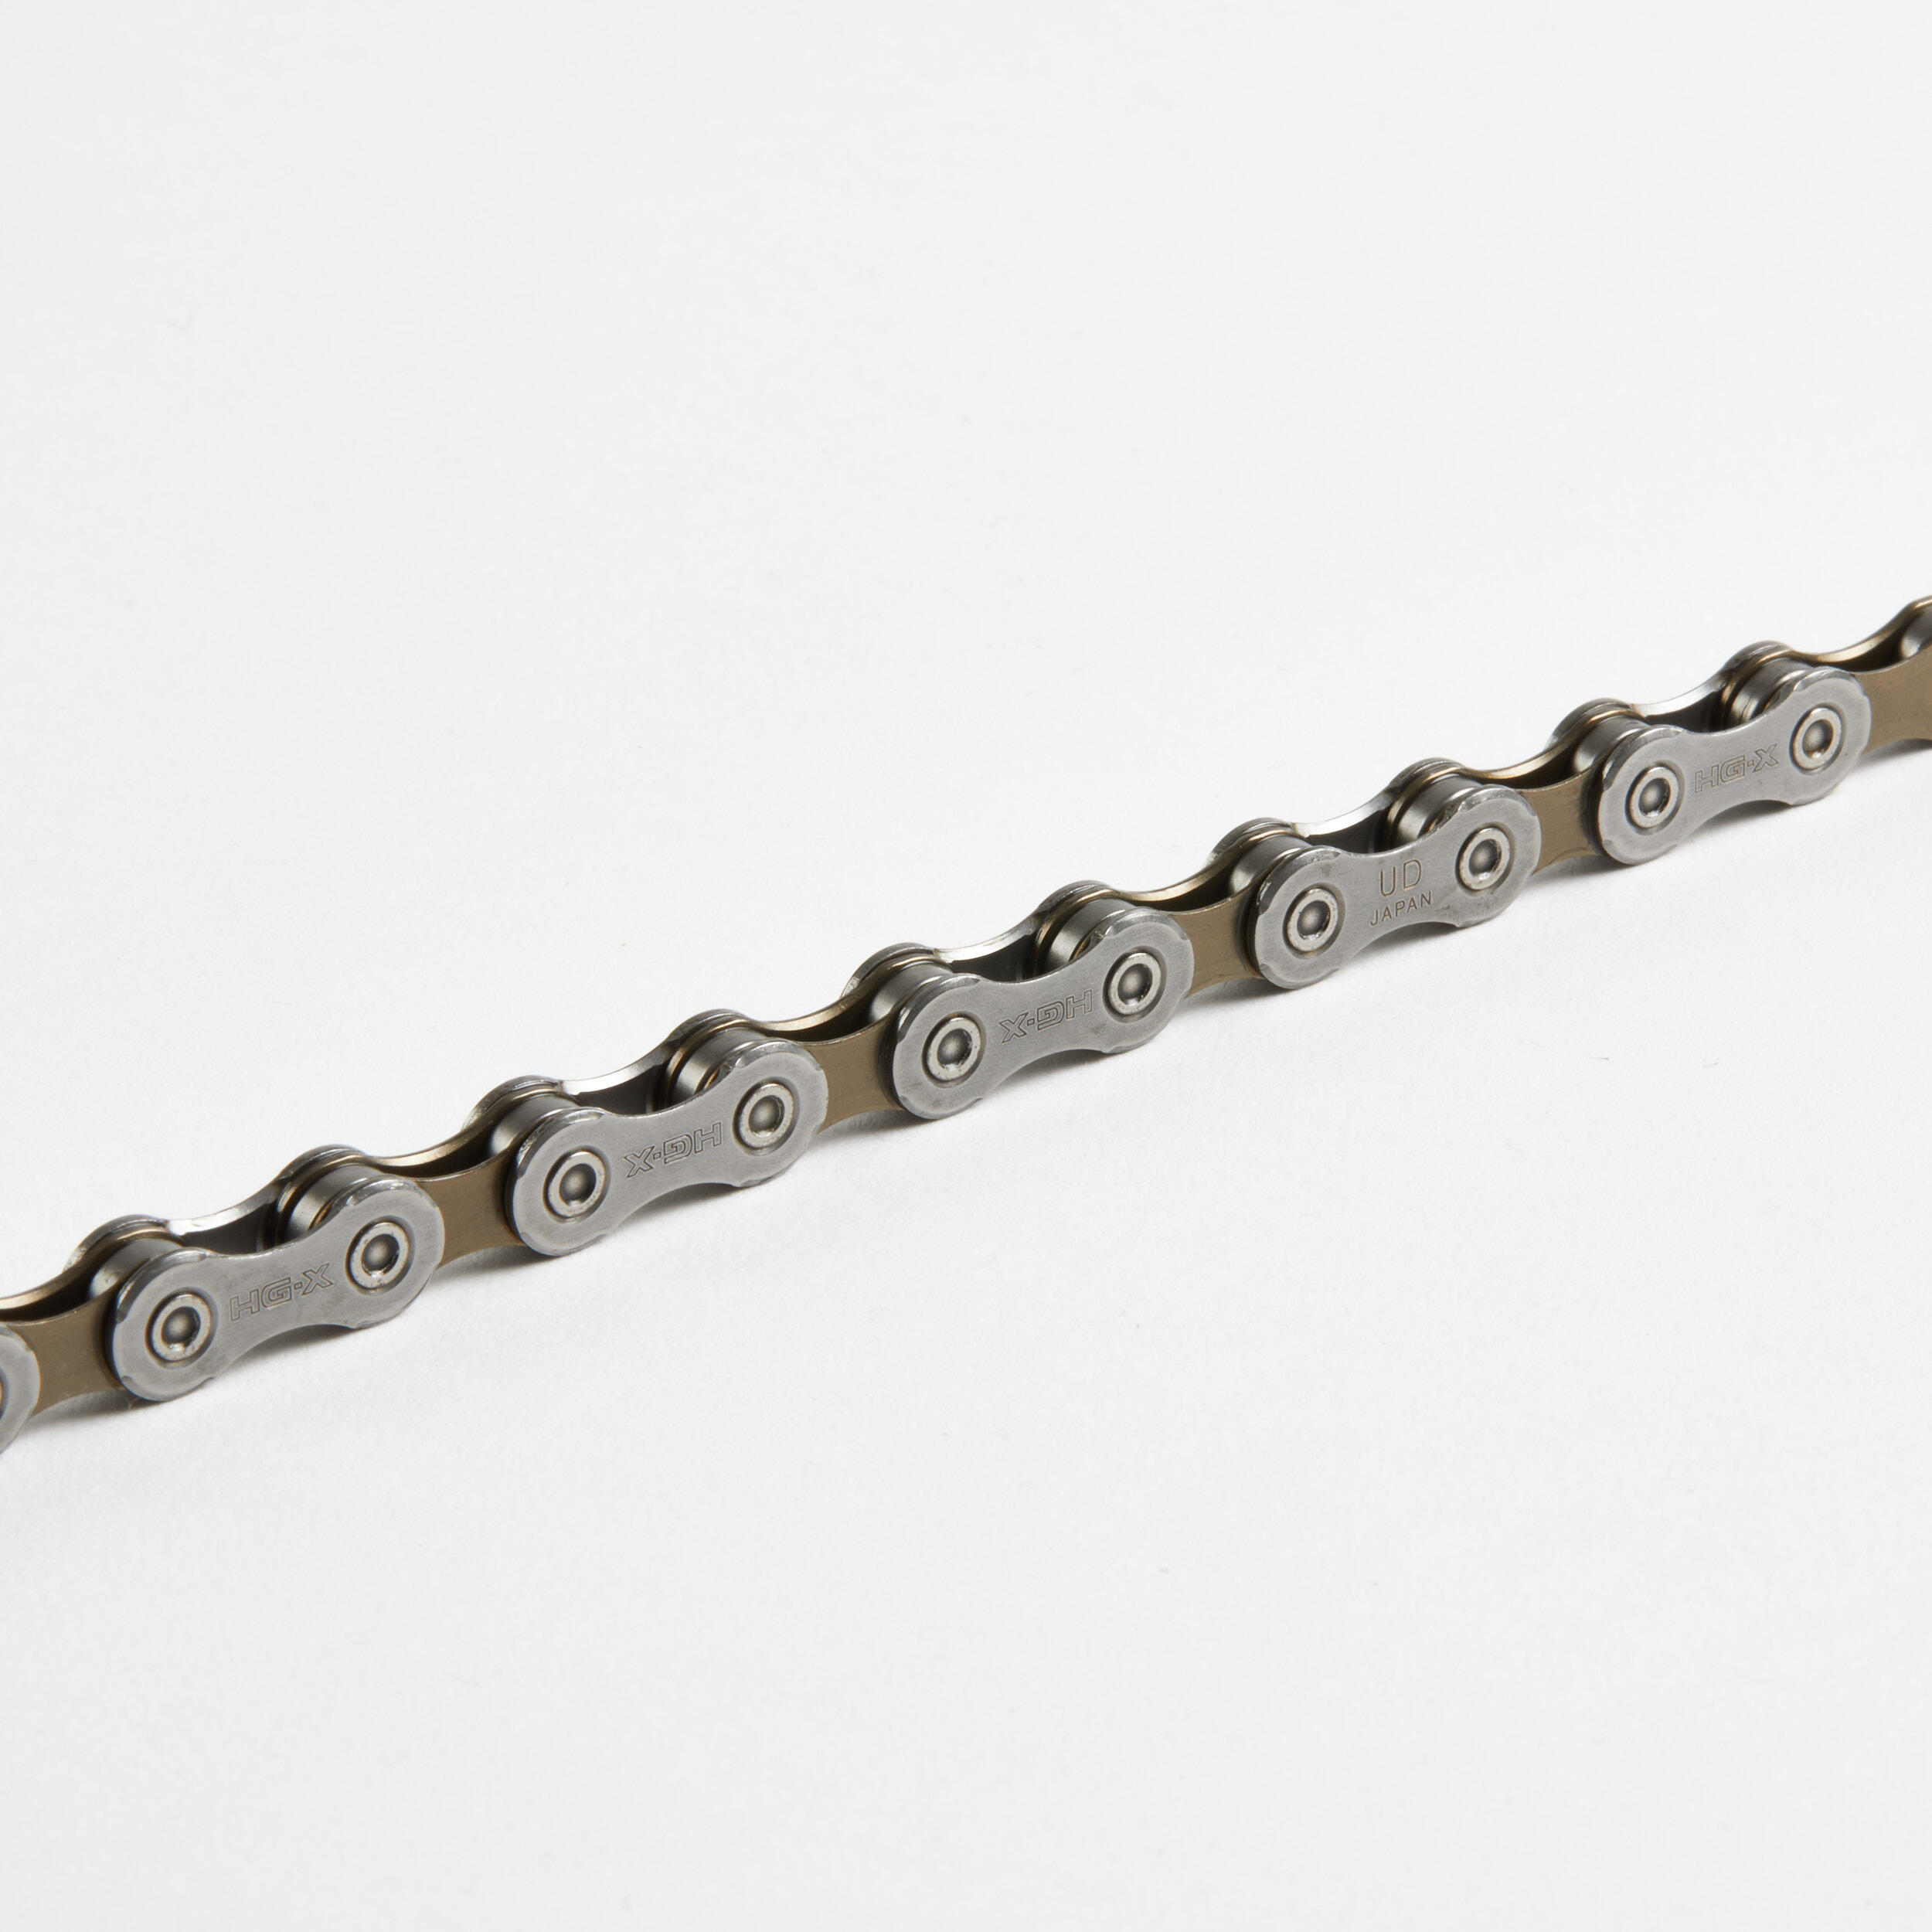 Deore HG54 10-Speed Chain 1/5